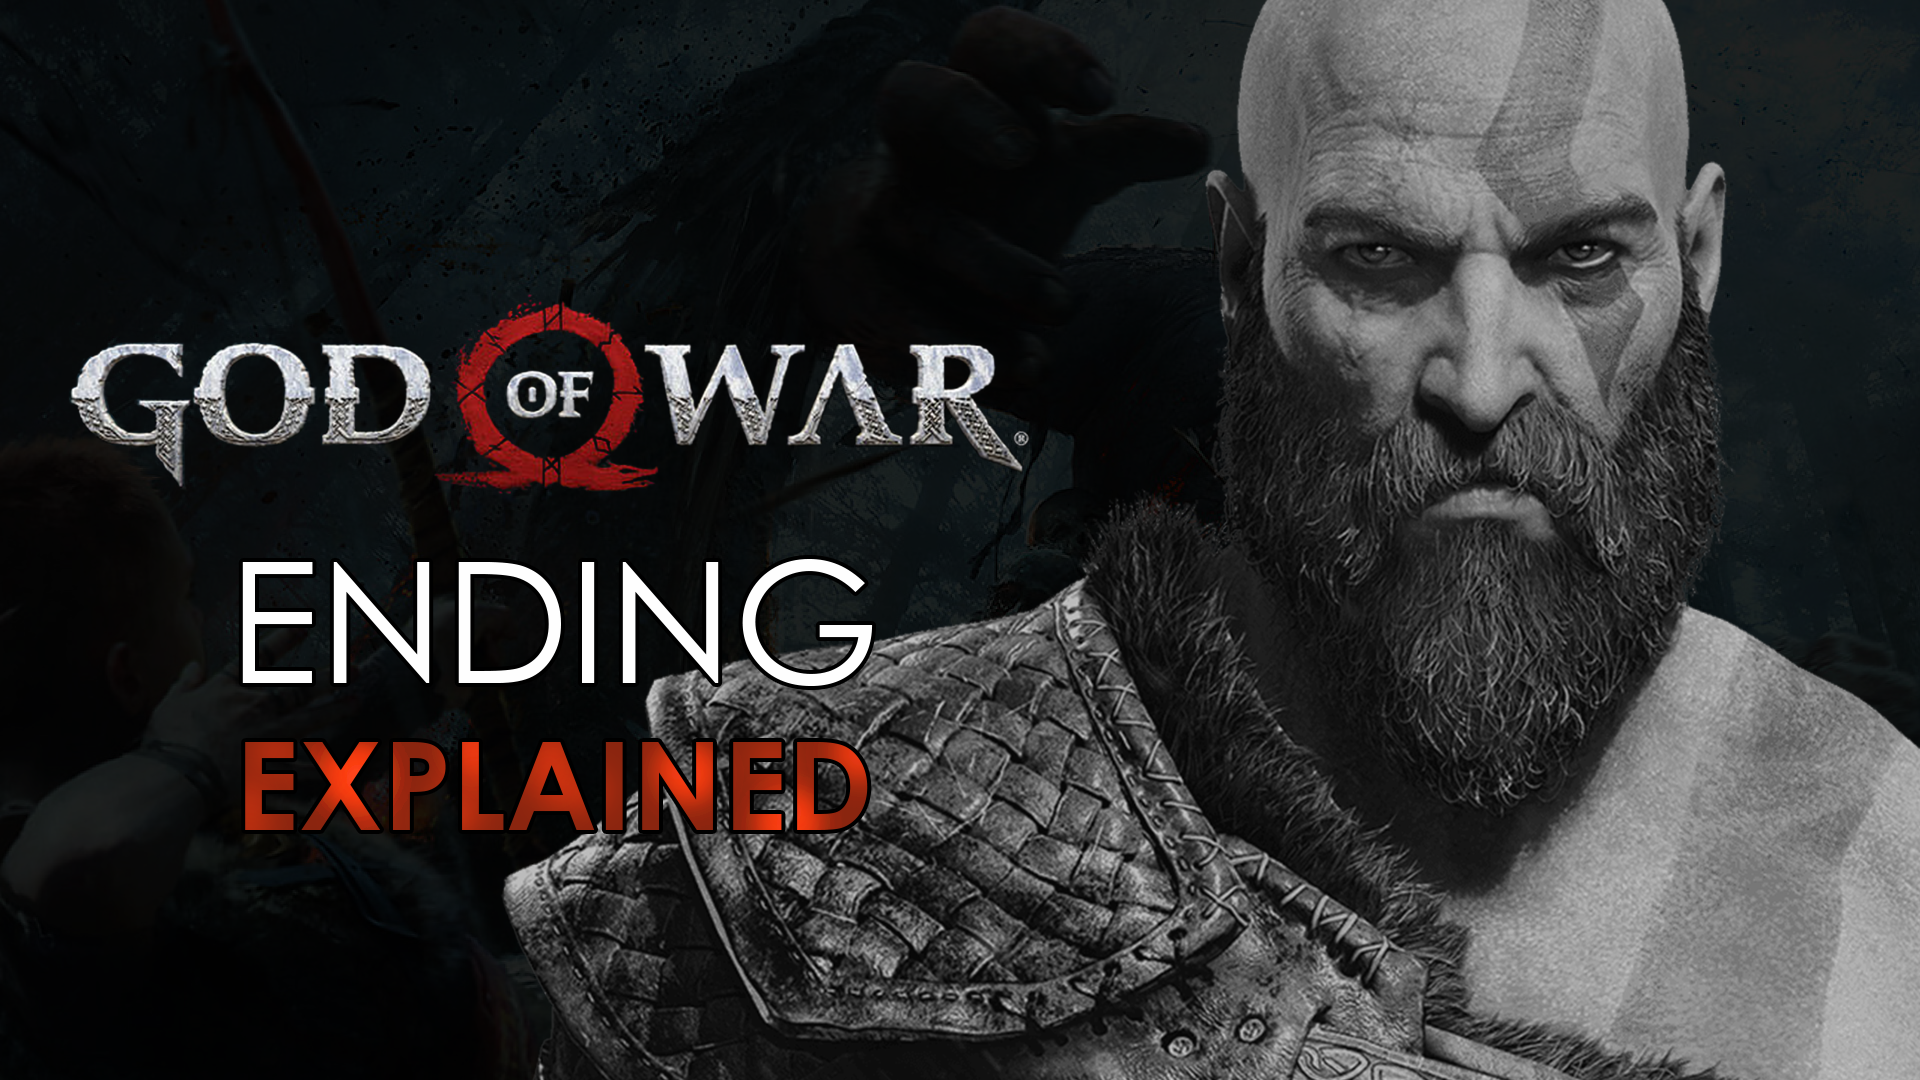 God Of War Ending Explained Video by Deffinition Games Ending and Atreus True Identity